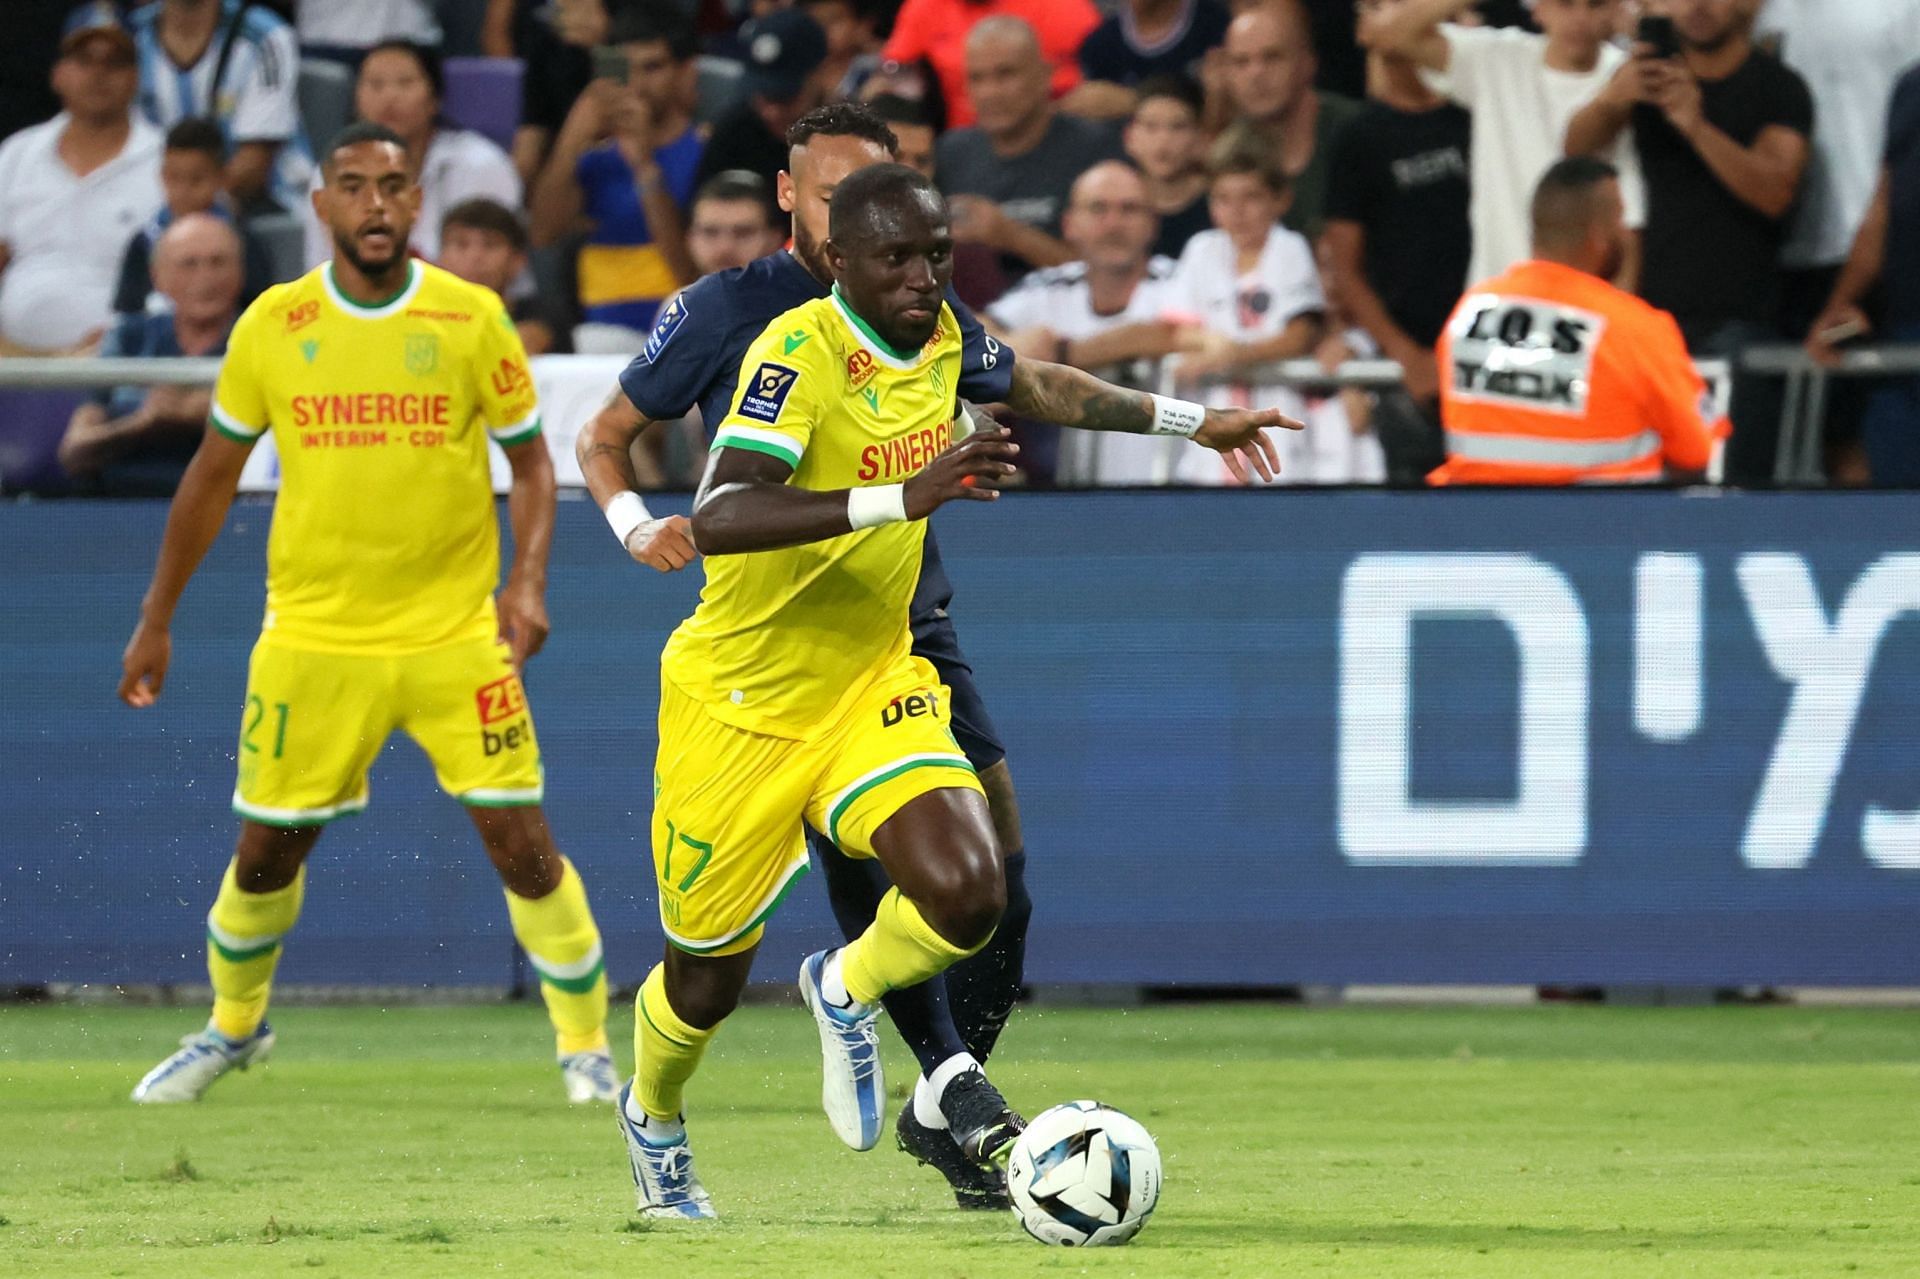 Nantes will face Angers on Sunday - Ligue 1